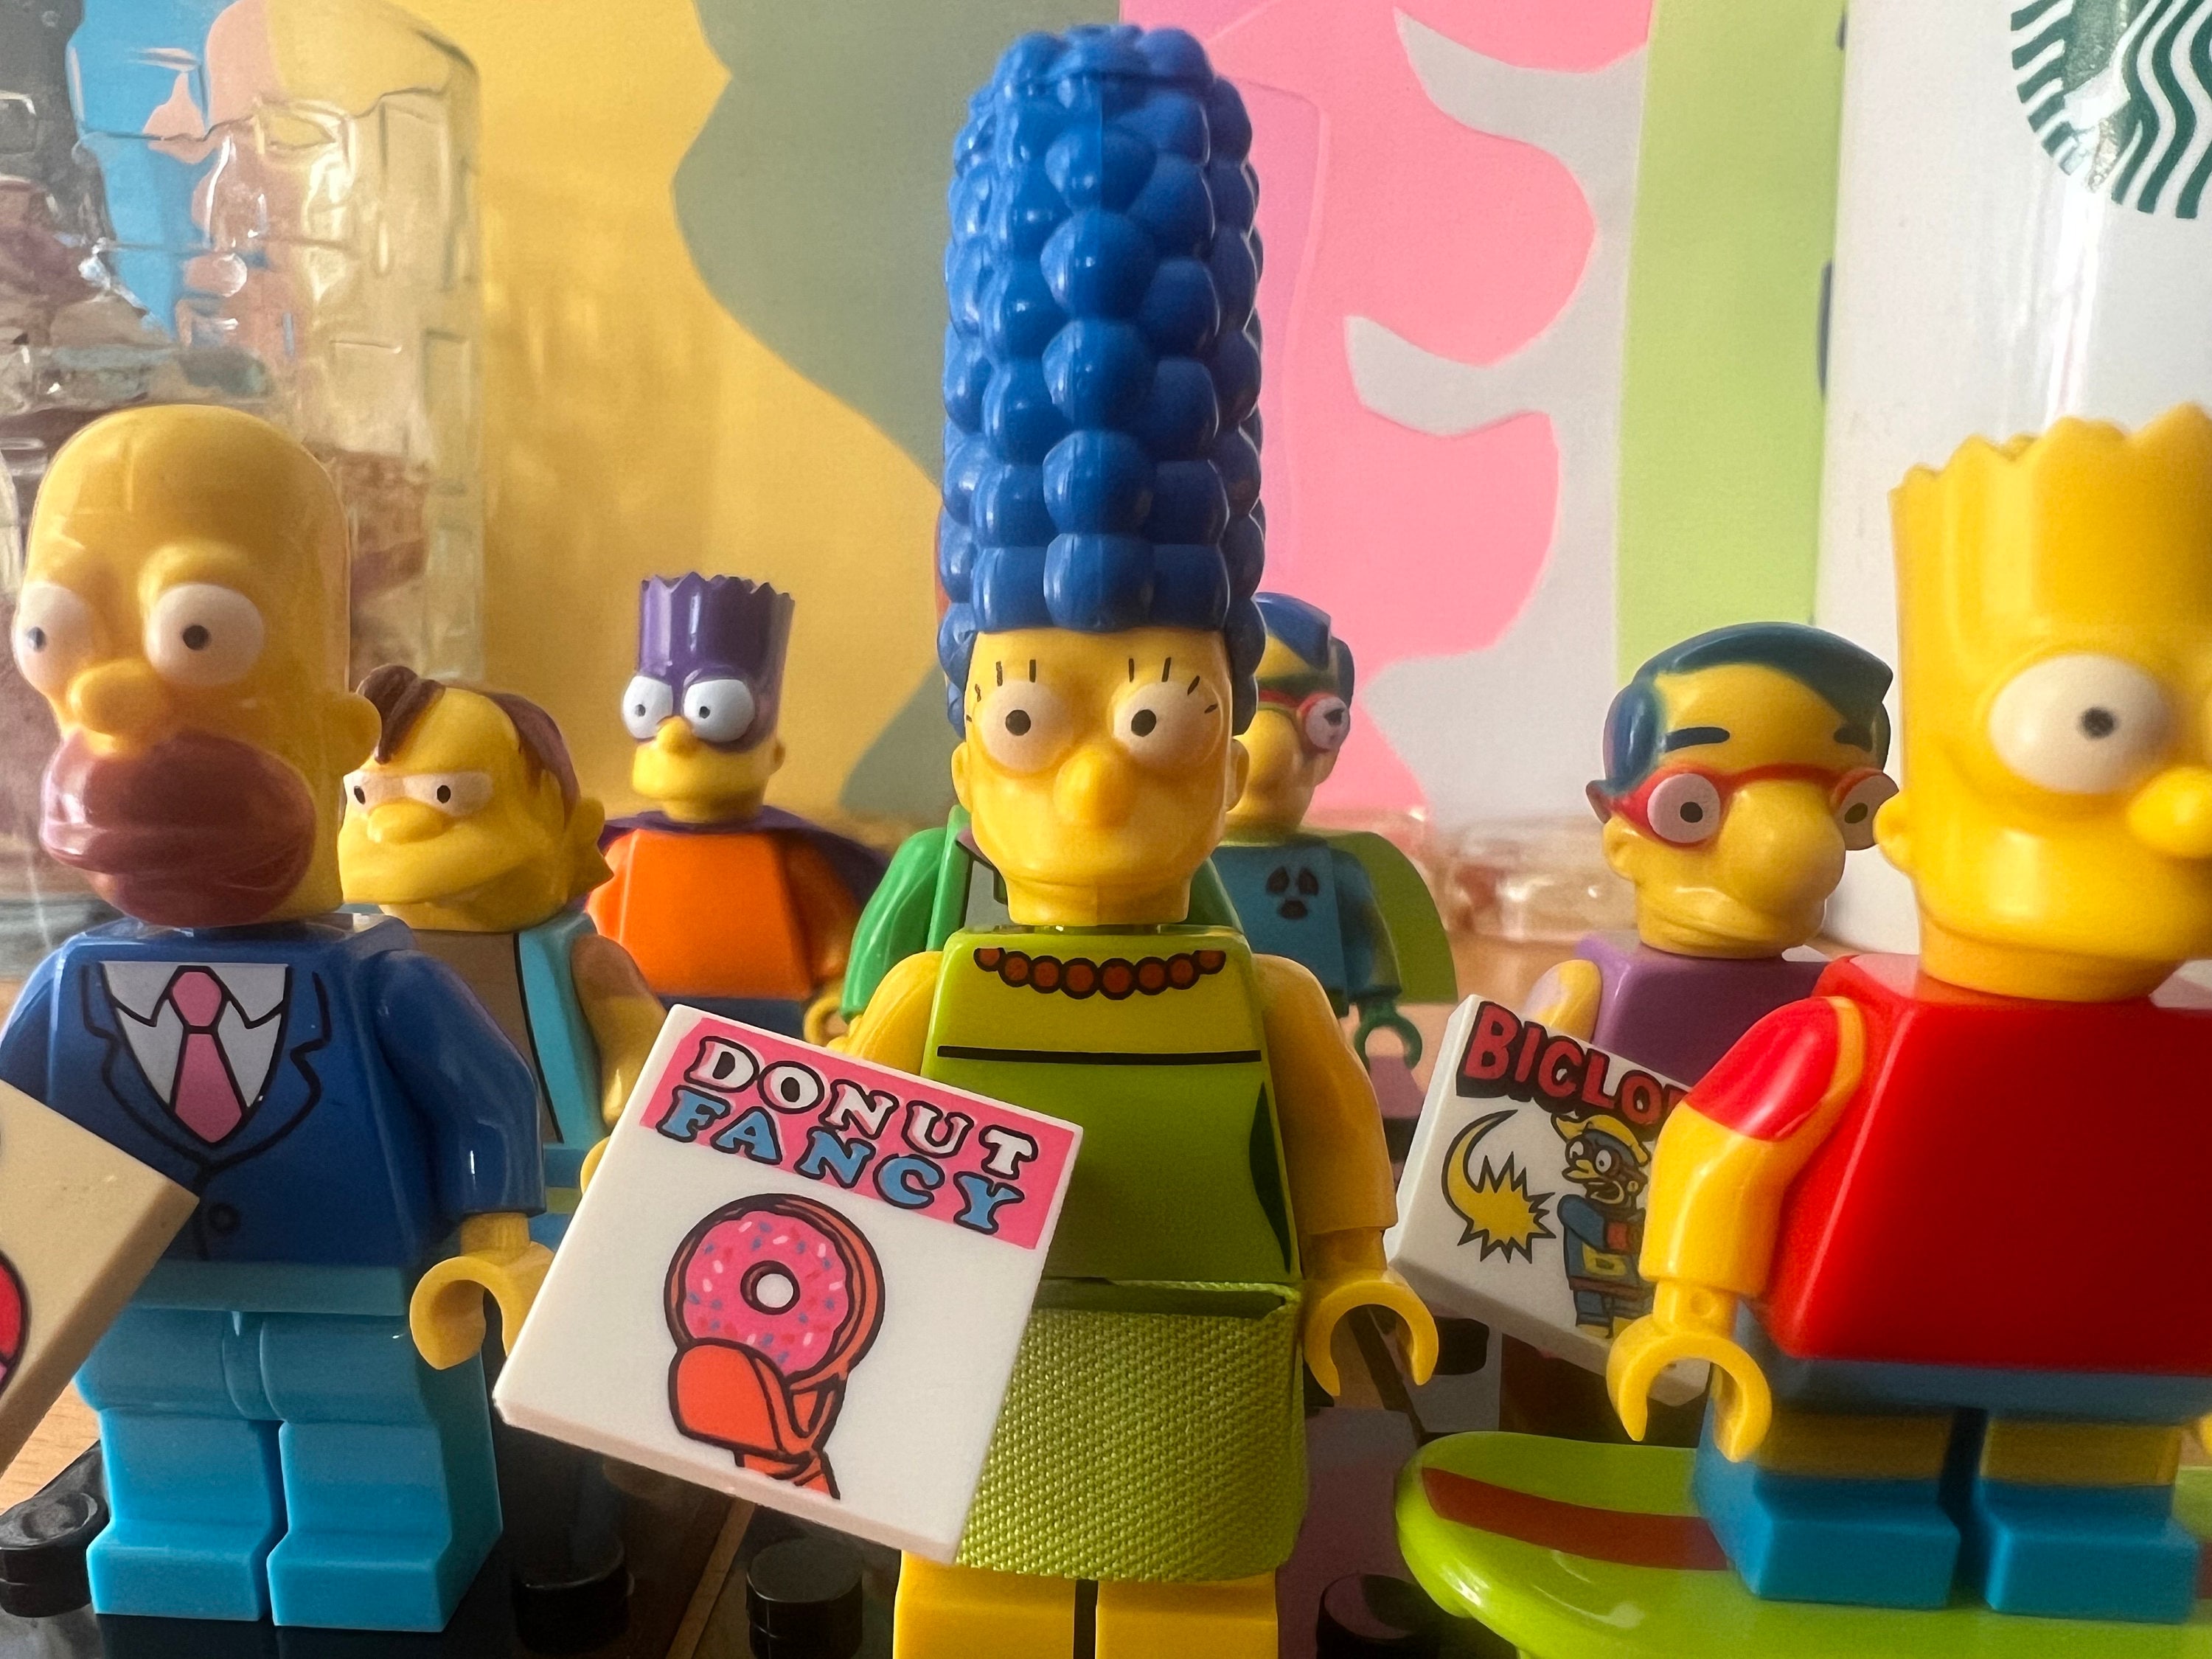 LEGO® Minifigures, The Simpsons™ Series - Videos - LEGO.com for kids